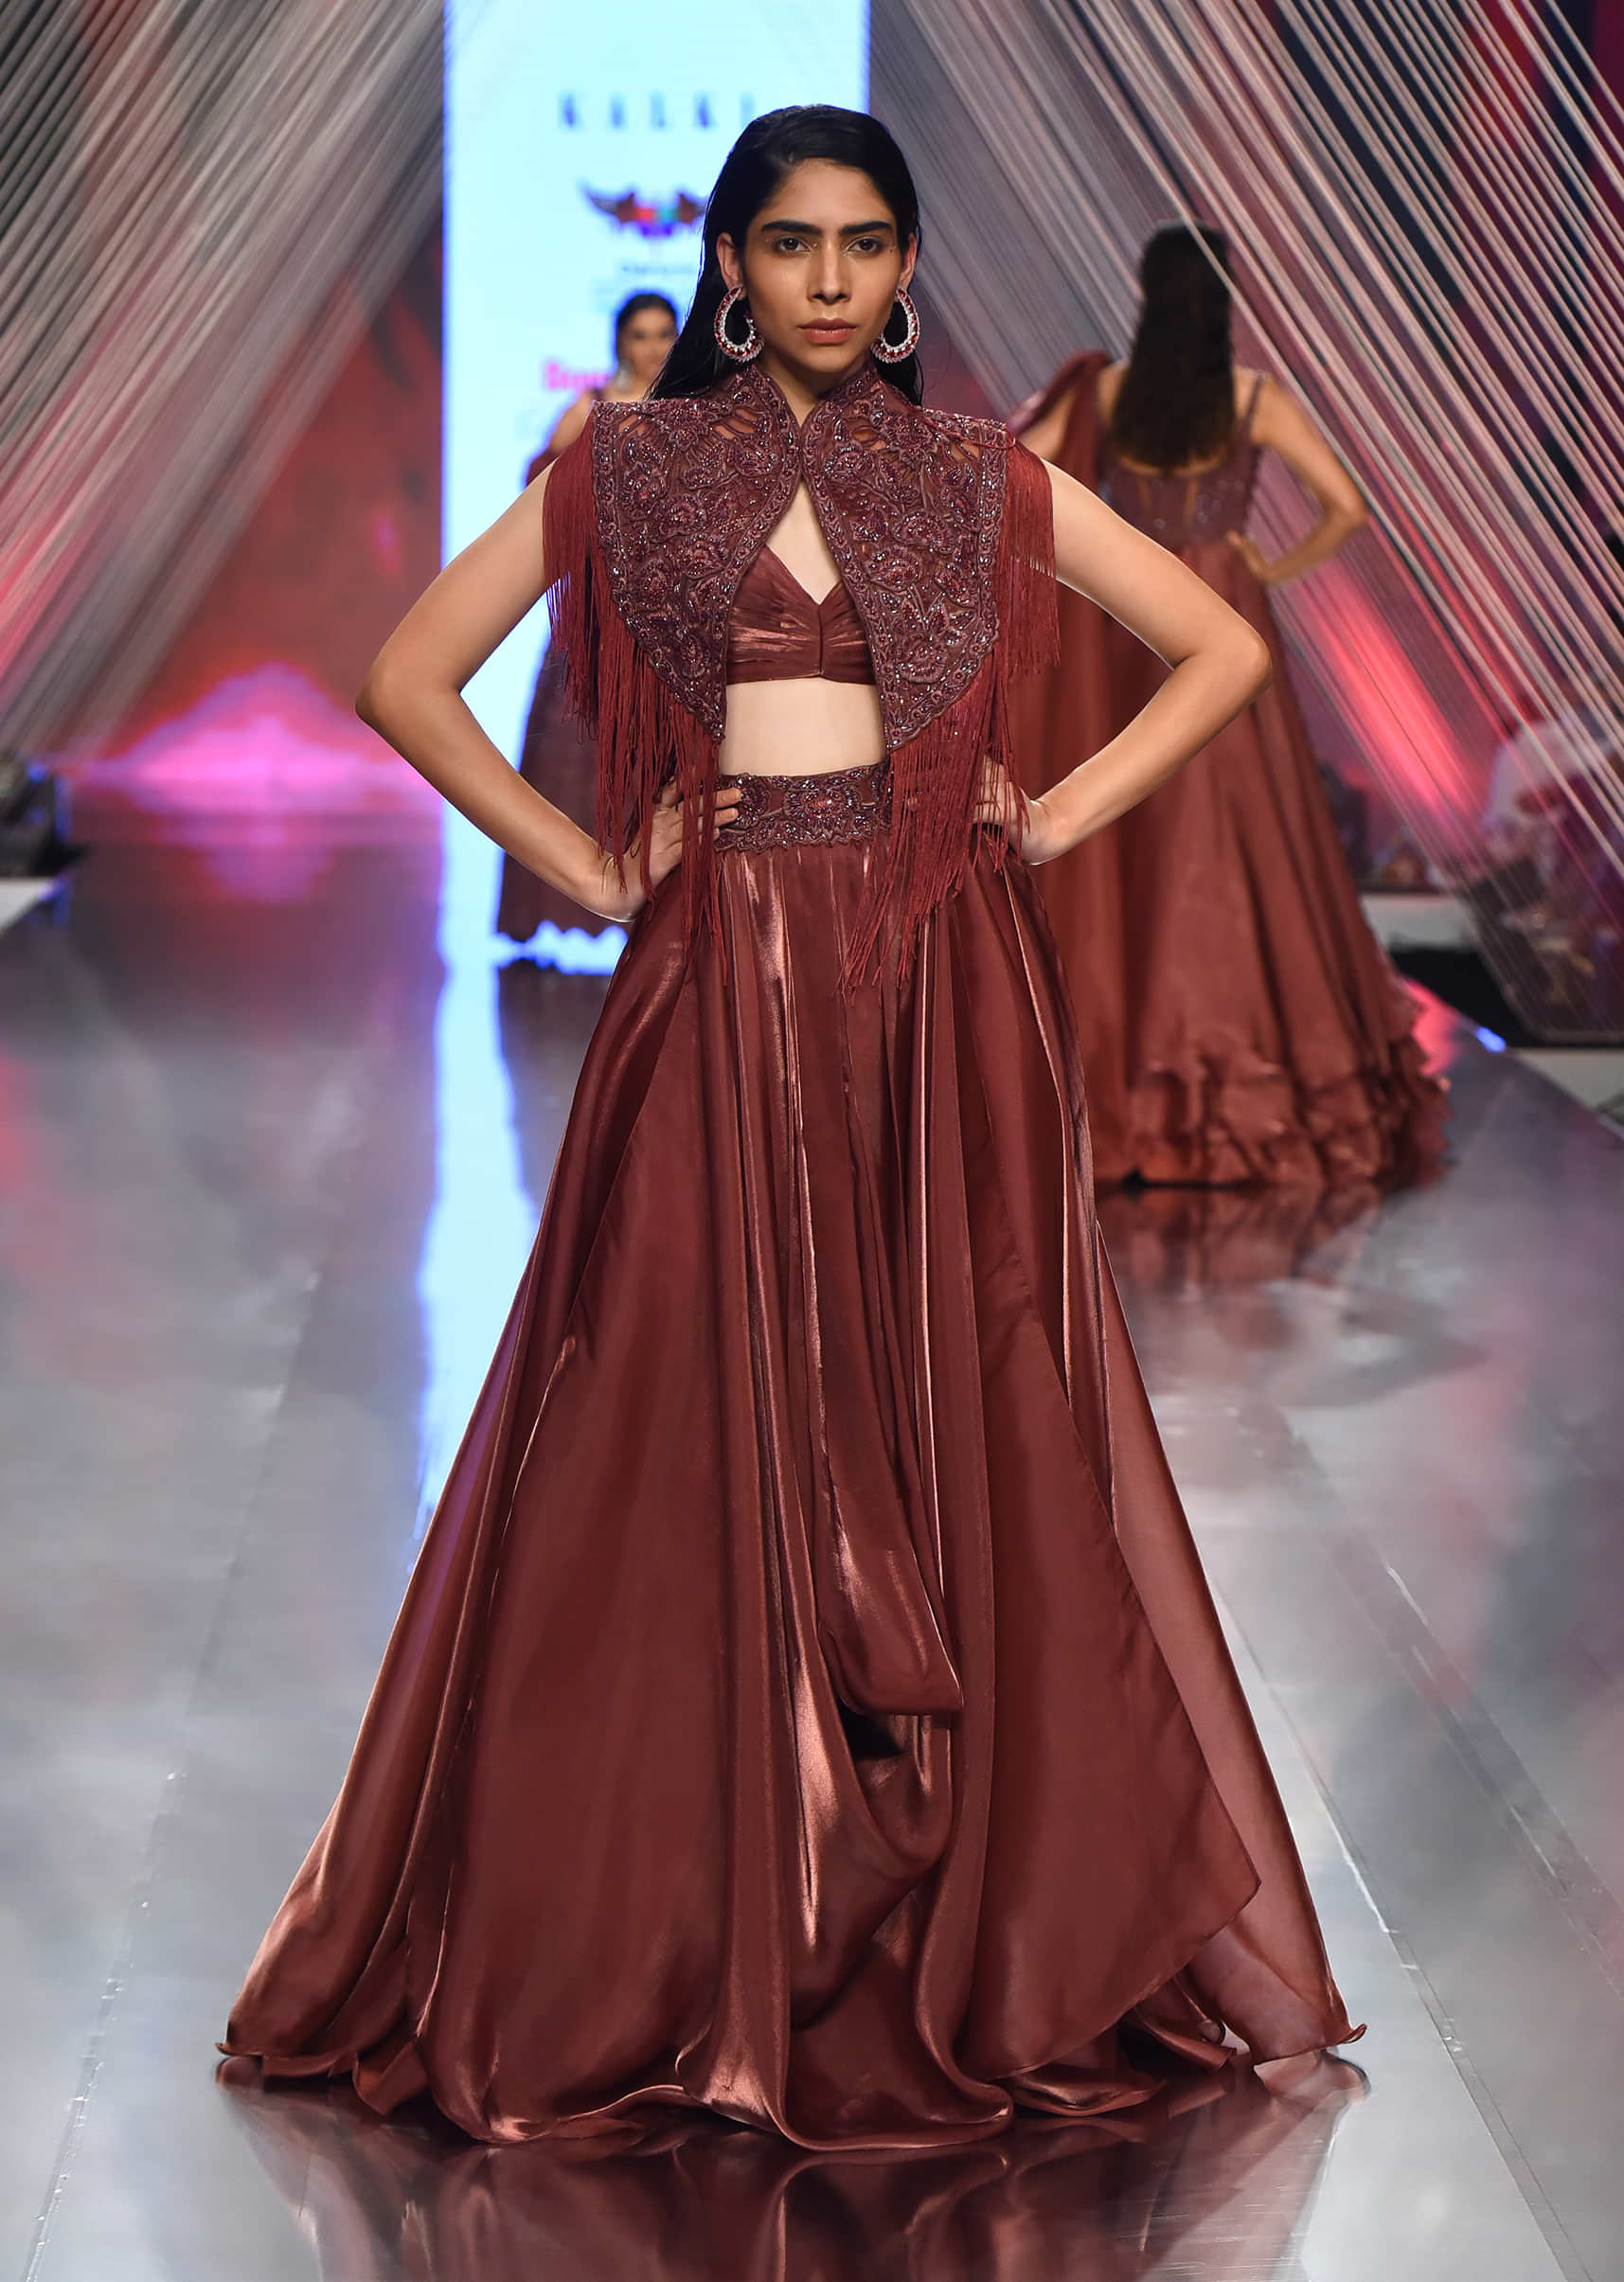 Cherry Organza Lehenga With A Crop Top In Sequins Embroidery, Crop Top Comes In Sleeveless In A V Neckline, Paired With The Matching Fringed Cape